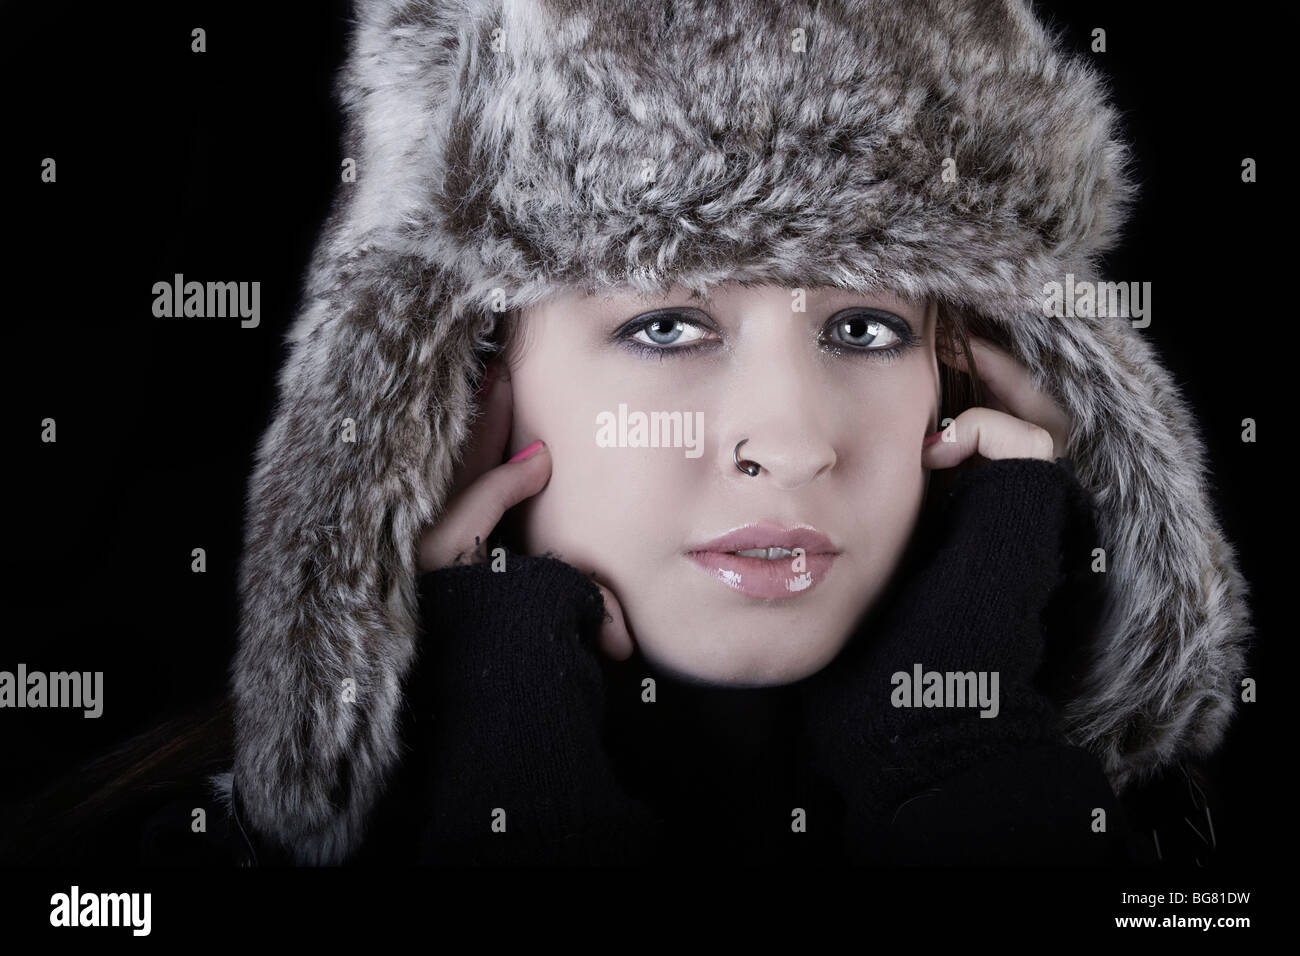 low key image of a beautiful young woman in a furry hat Stock Photo